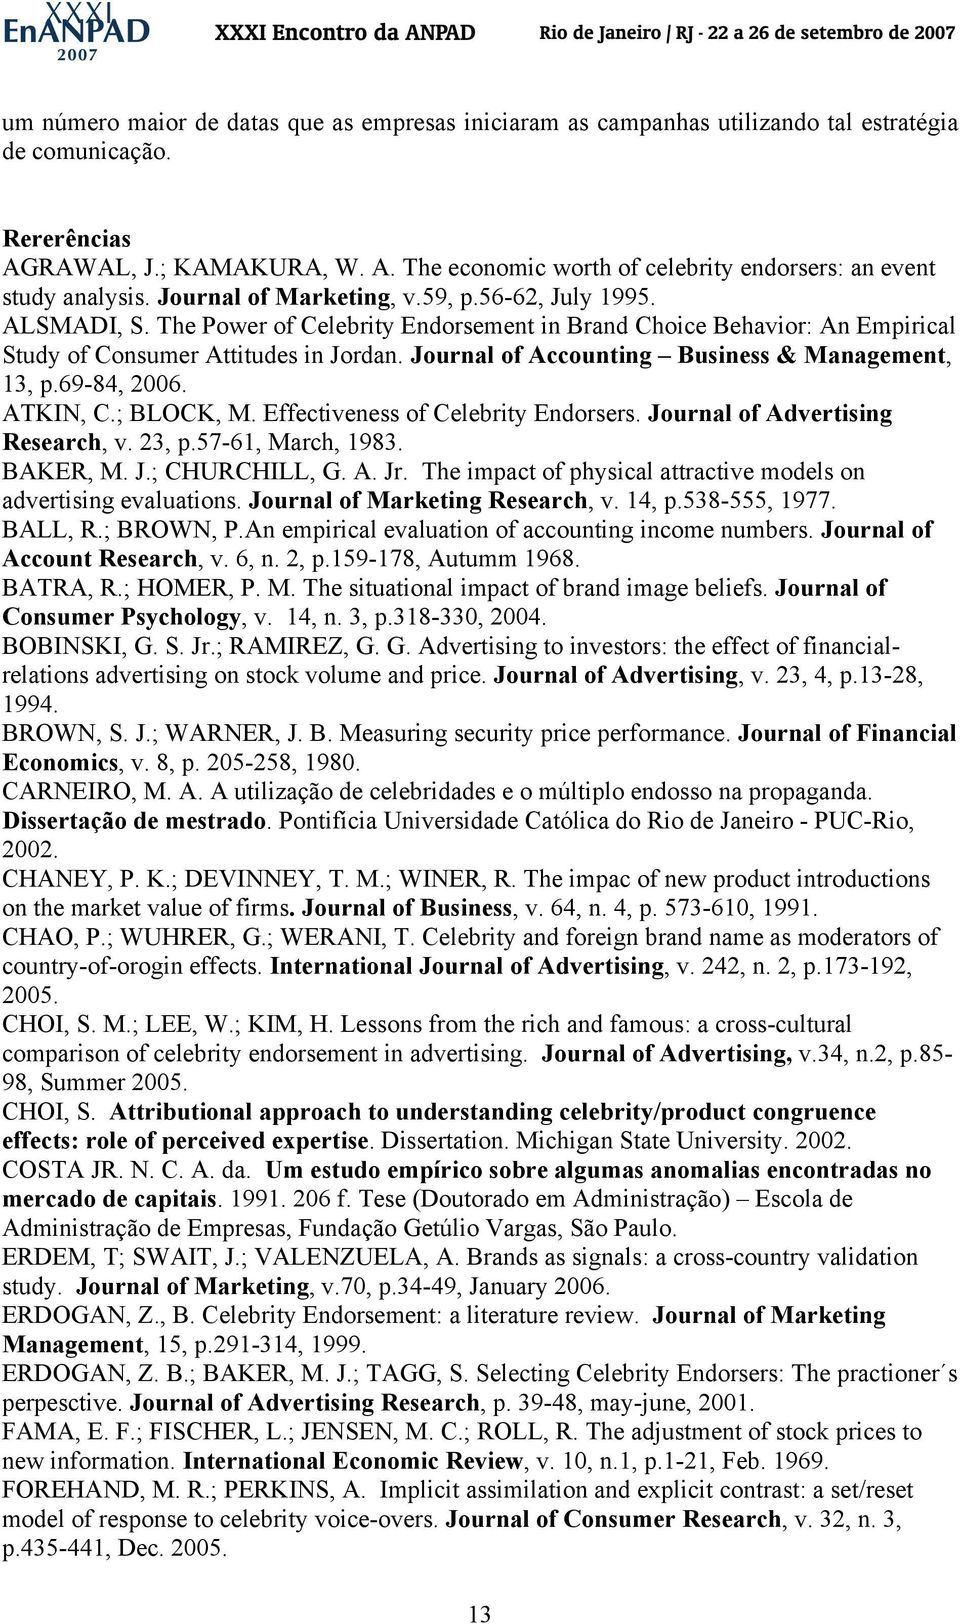 Journal of Accounting Business & Management, 13, p.69-84, 2006. ATKIN, C.; BLOCK, M. Effectiveness of Celebrity Endorsers. Journal of Advertising Research, v. 23, p.57-61, March, 1983. BAKER, M. J.; CHURCHILL, G.